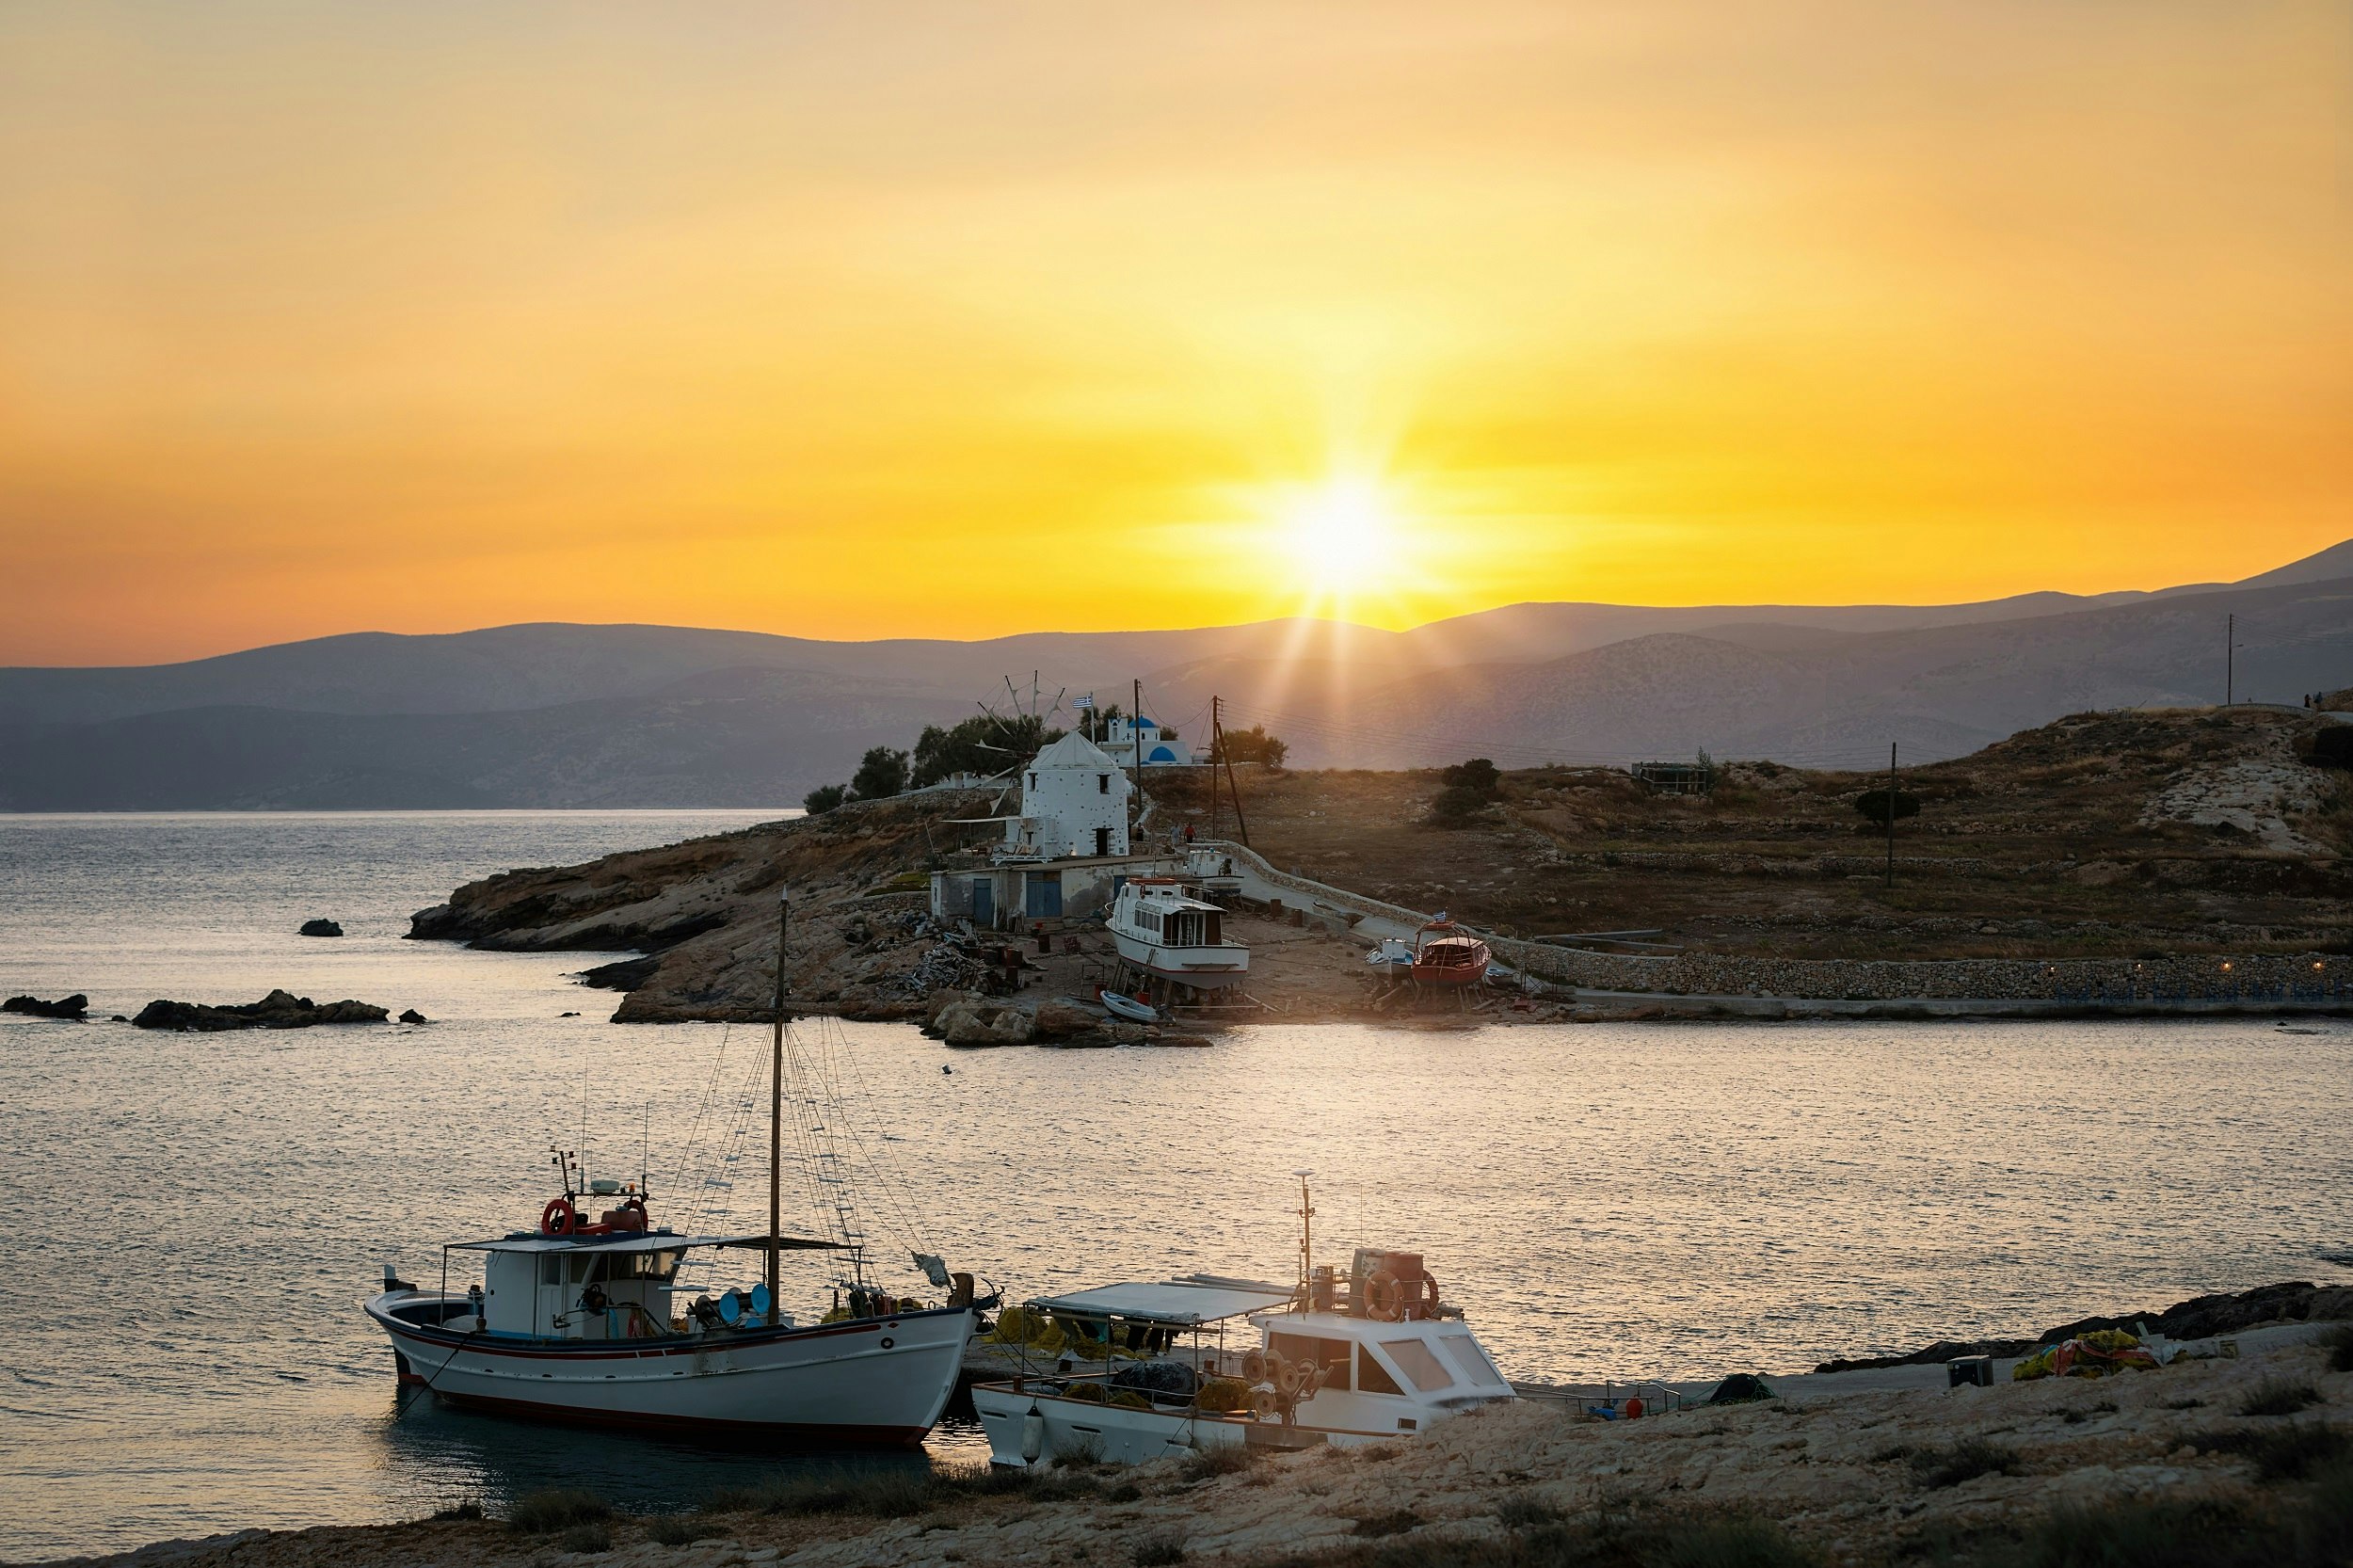 Two small fishing boats are docked near a rocky shore. A single white building stands on the shore. The sun sets over the hills in the background.